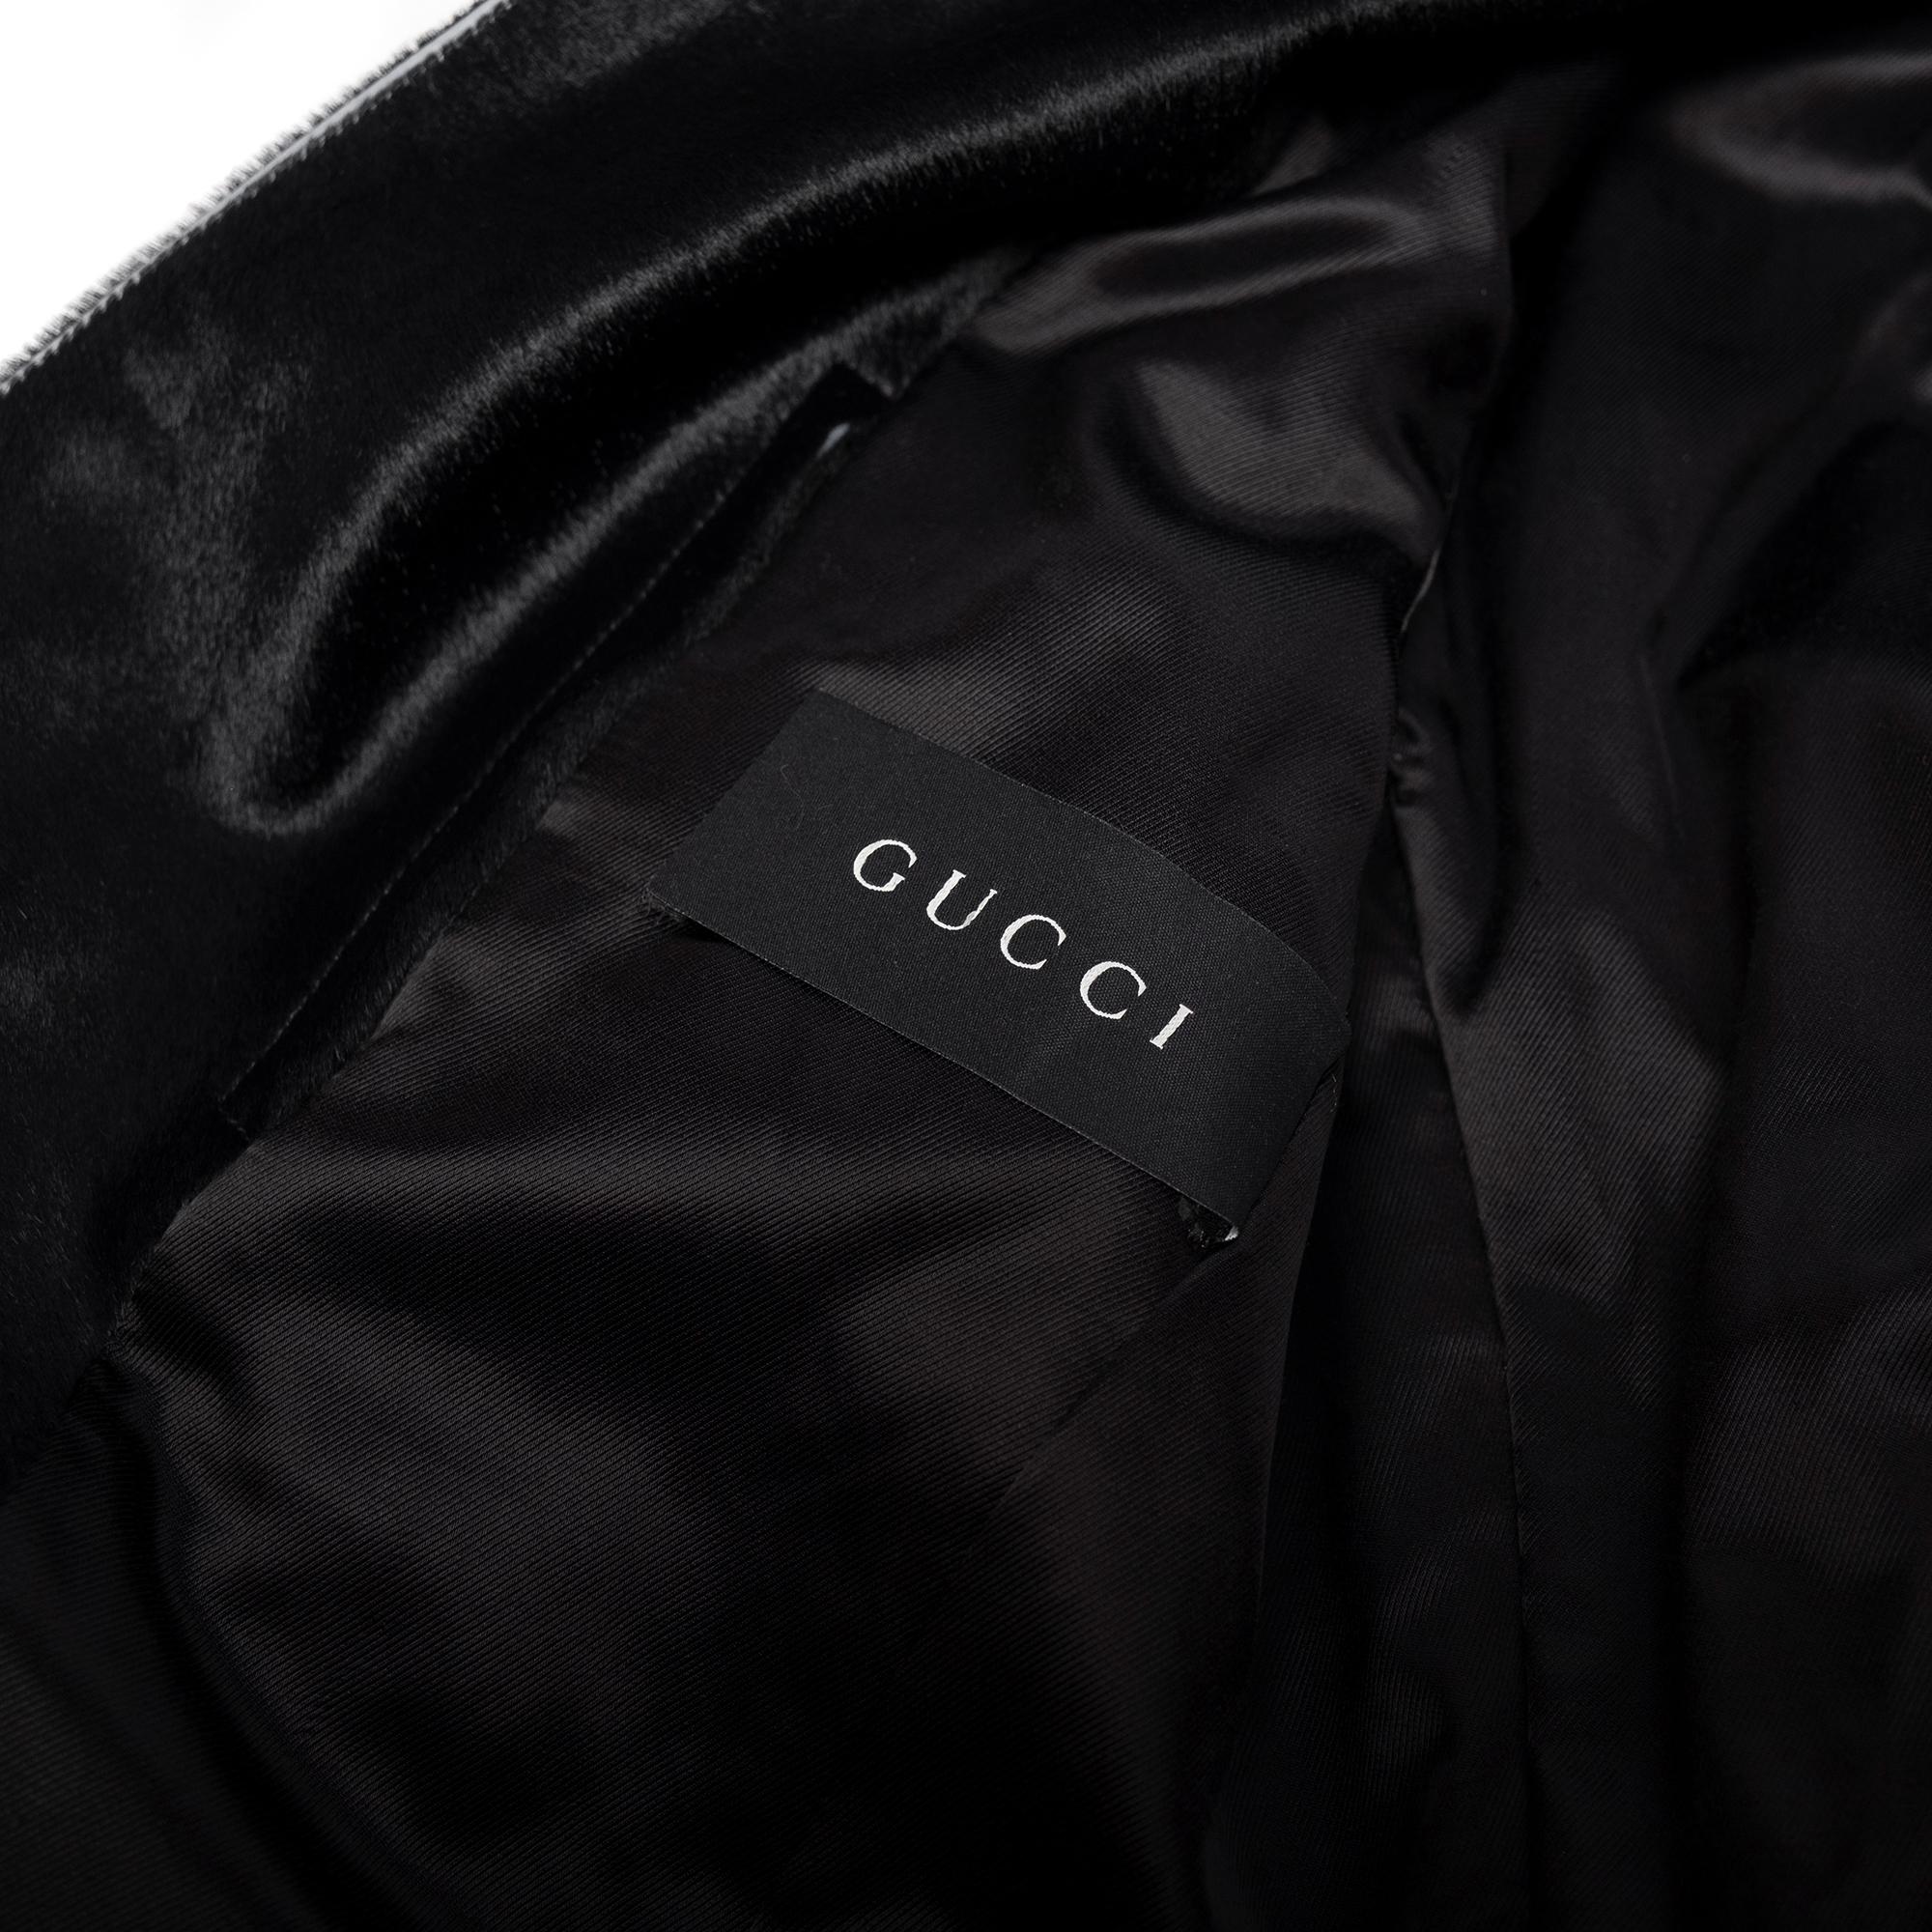 Gucci by Tom Ford AW2004 Ponyhair Rider Jacket 3